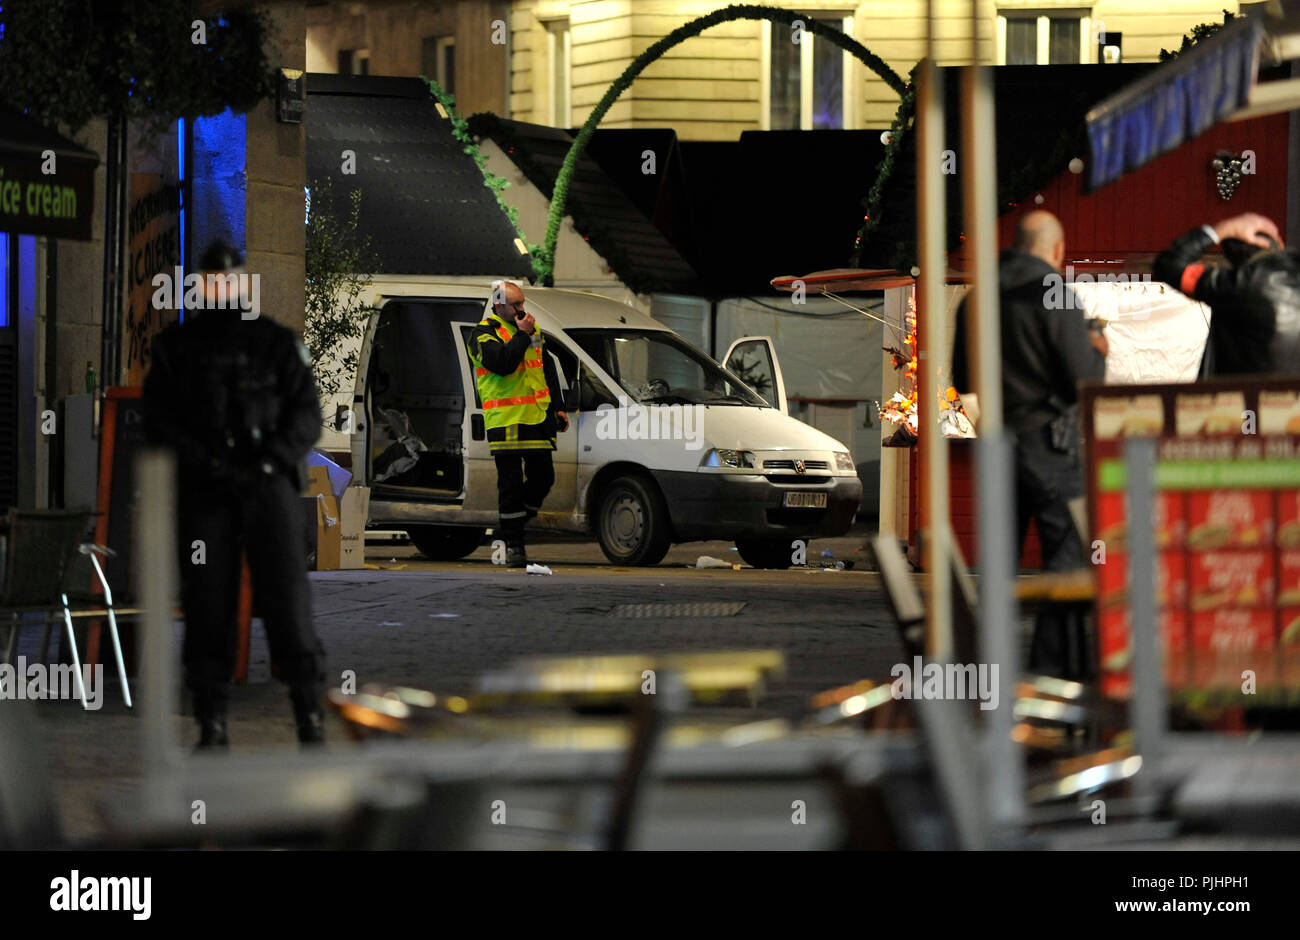 France, Nantes city, a car crashed into the crowd at the Christmas market,  police and firemen in action, help on site and investigation Stock Photo -  Alamy